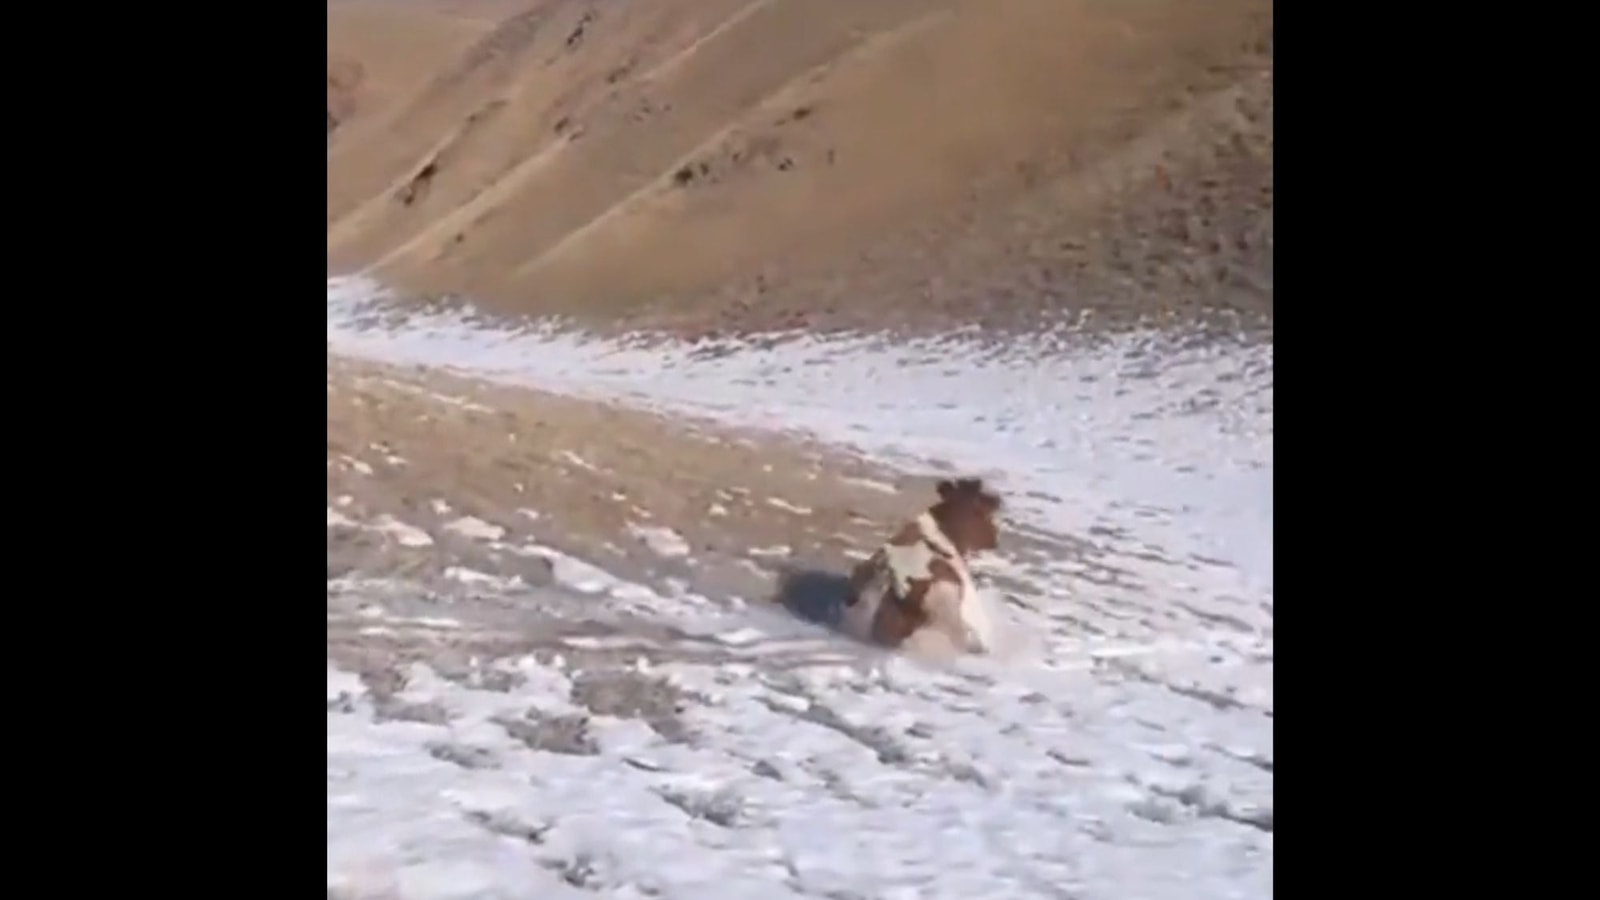 Cow slides down snowy mountain perfectly, viral video will cure Monday  blues